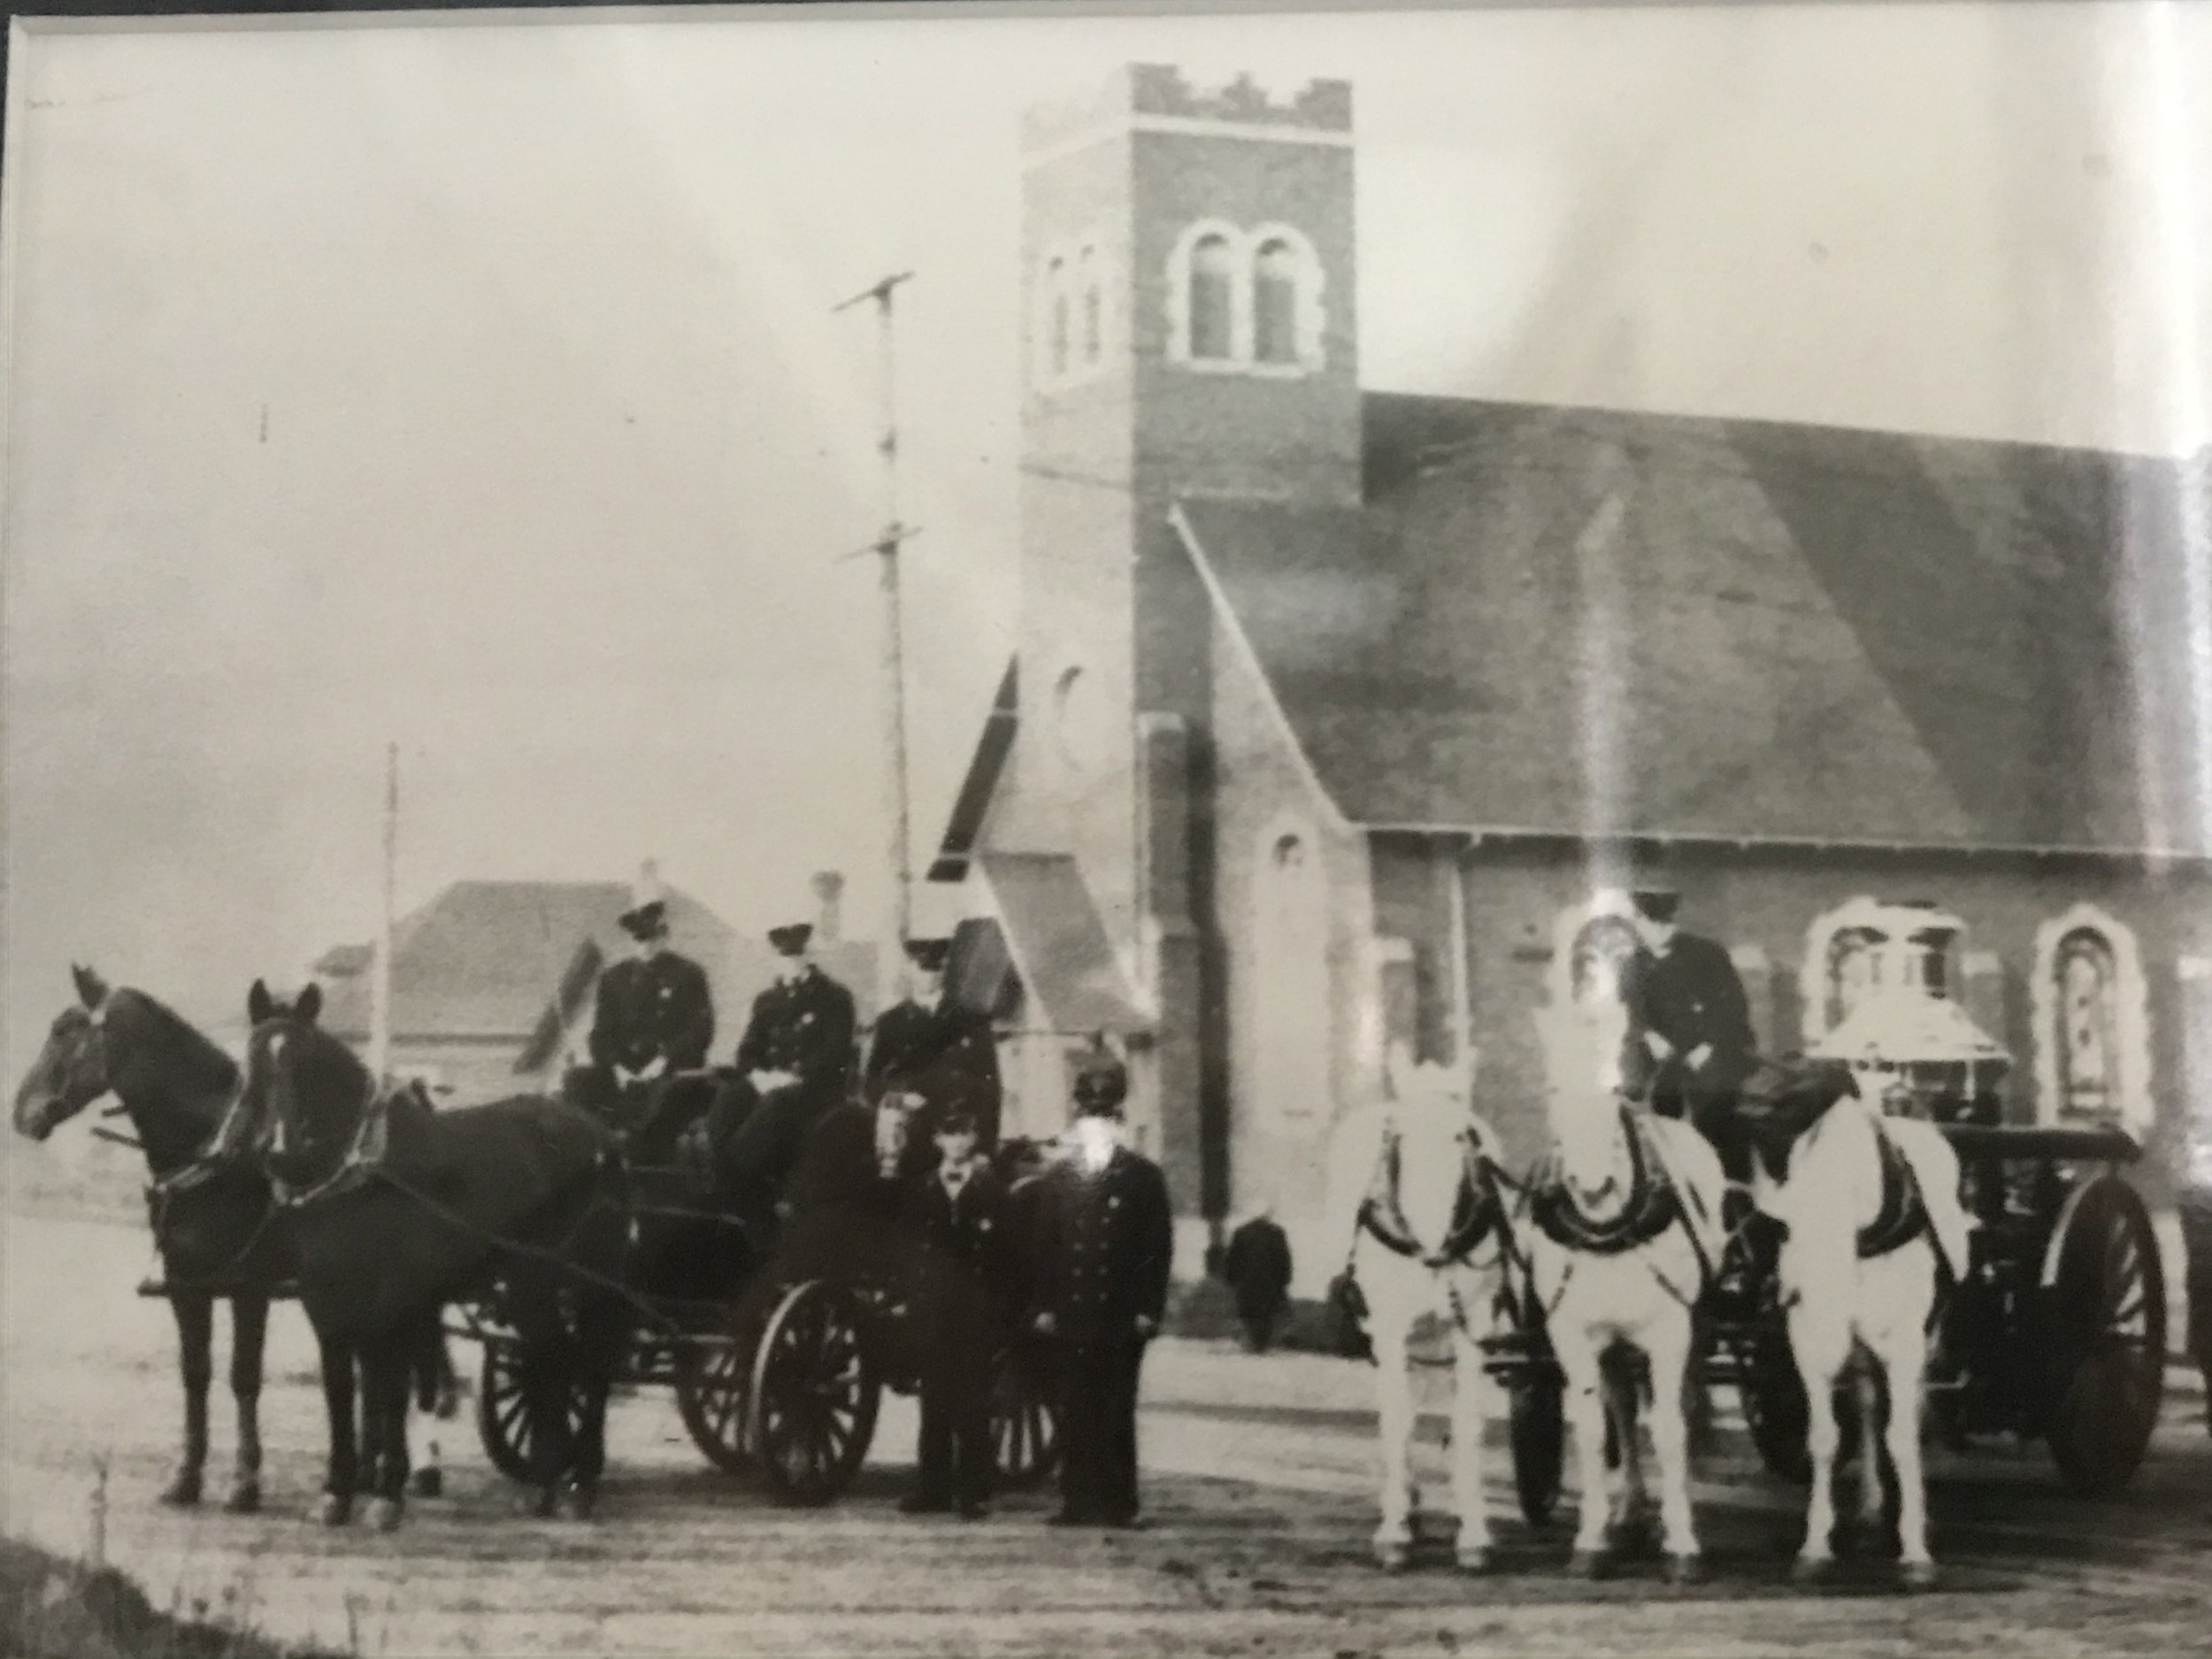 1913 - Firefighters from Tacoma Fire Department’s Station No. 2 in front of St. Paul Lutheran Church